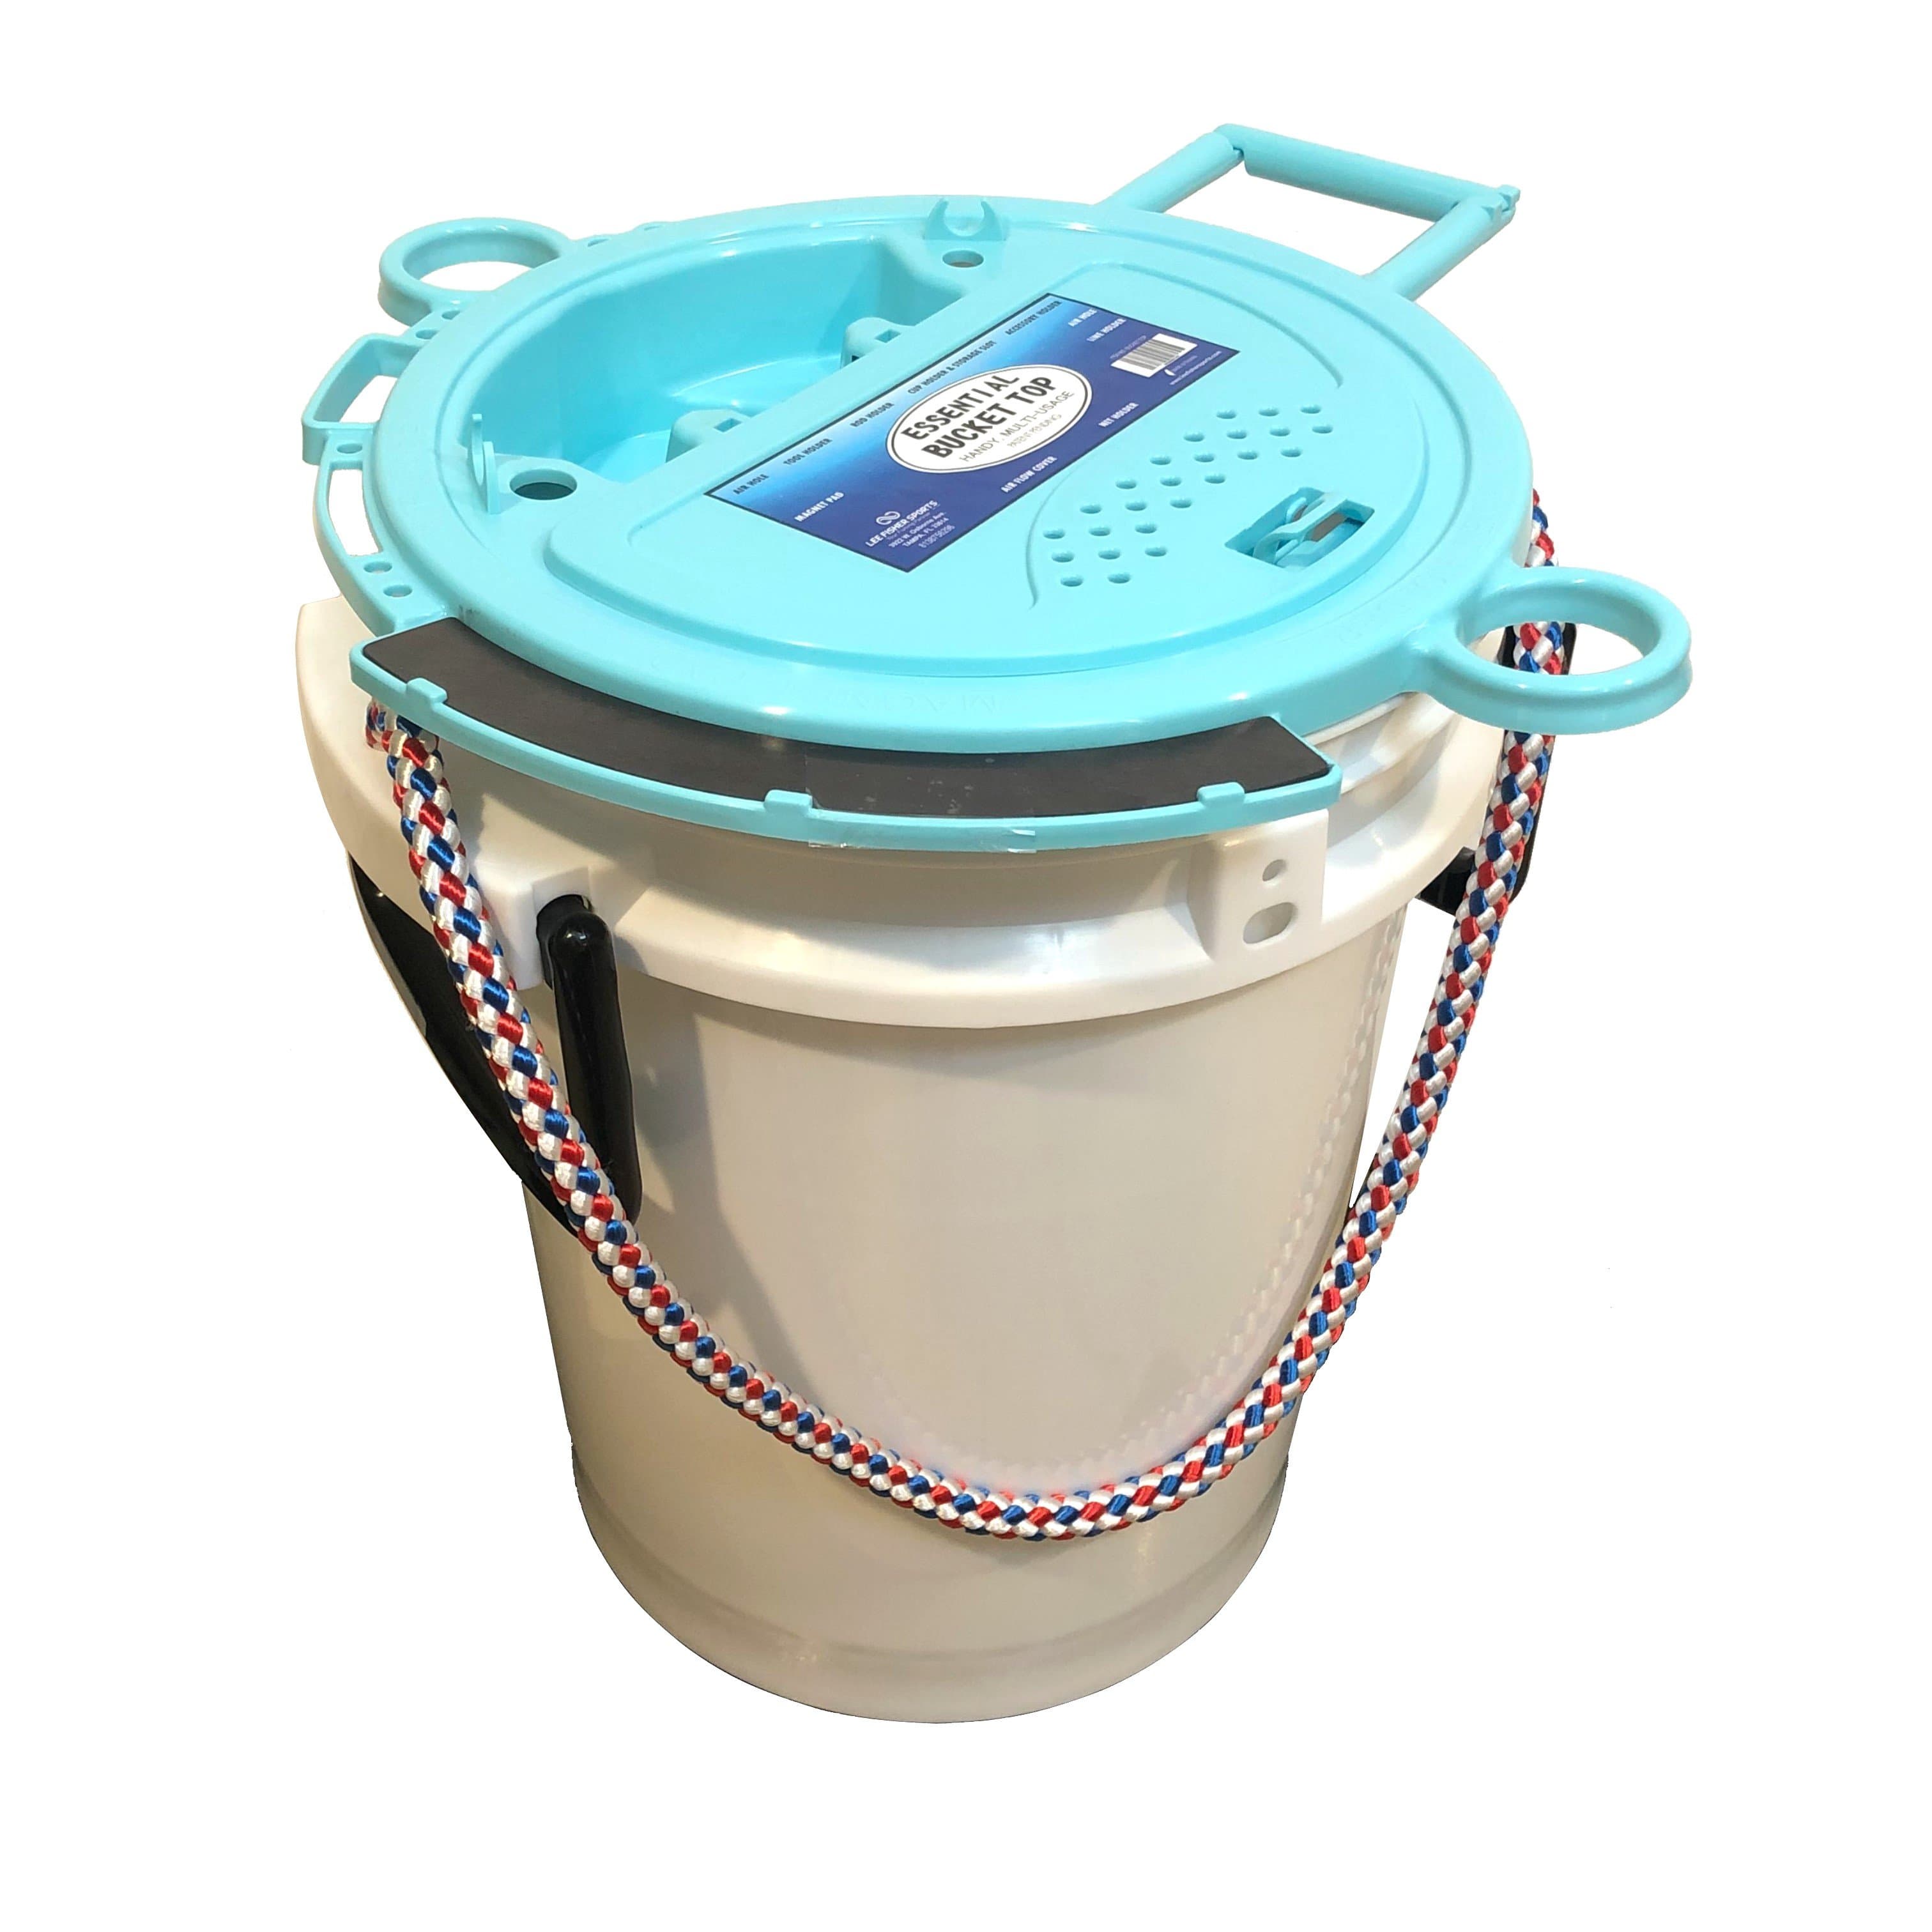 Lee Fisher Sports - 5 Gallon iSmart Bucket (Rope Handle) with